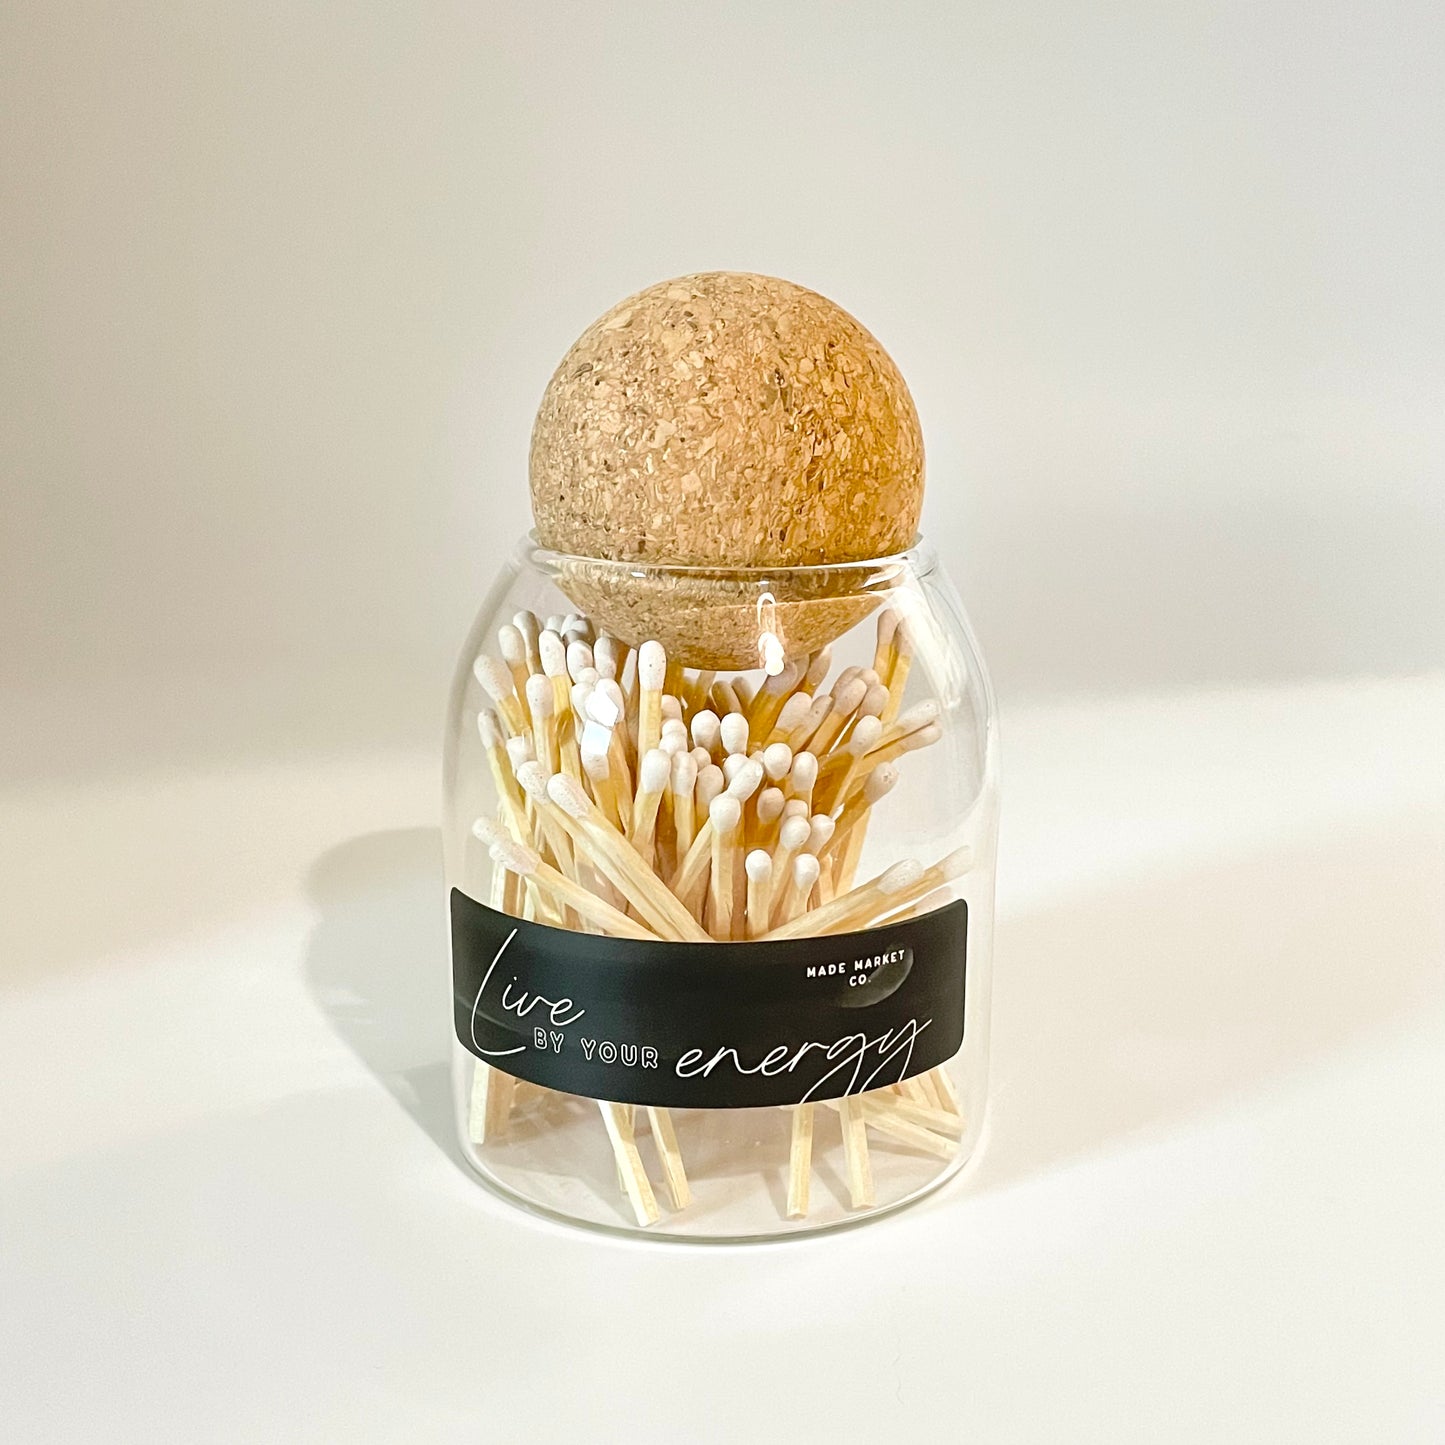 Apothecary long Matches in glass jar with cork ball stopper and striker for candles